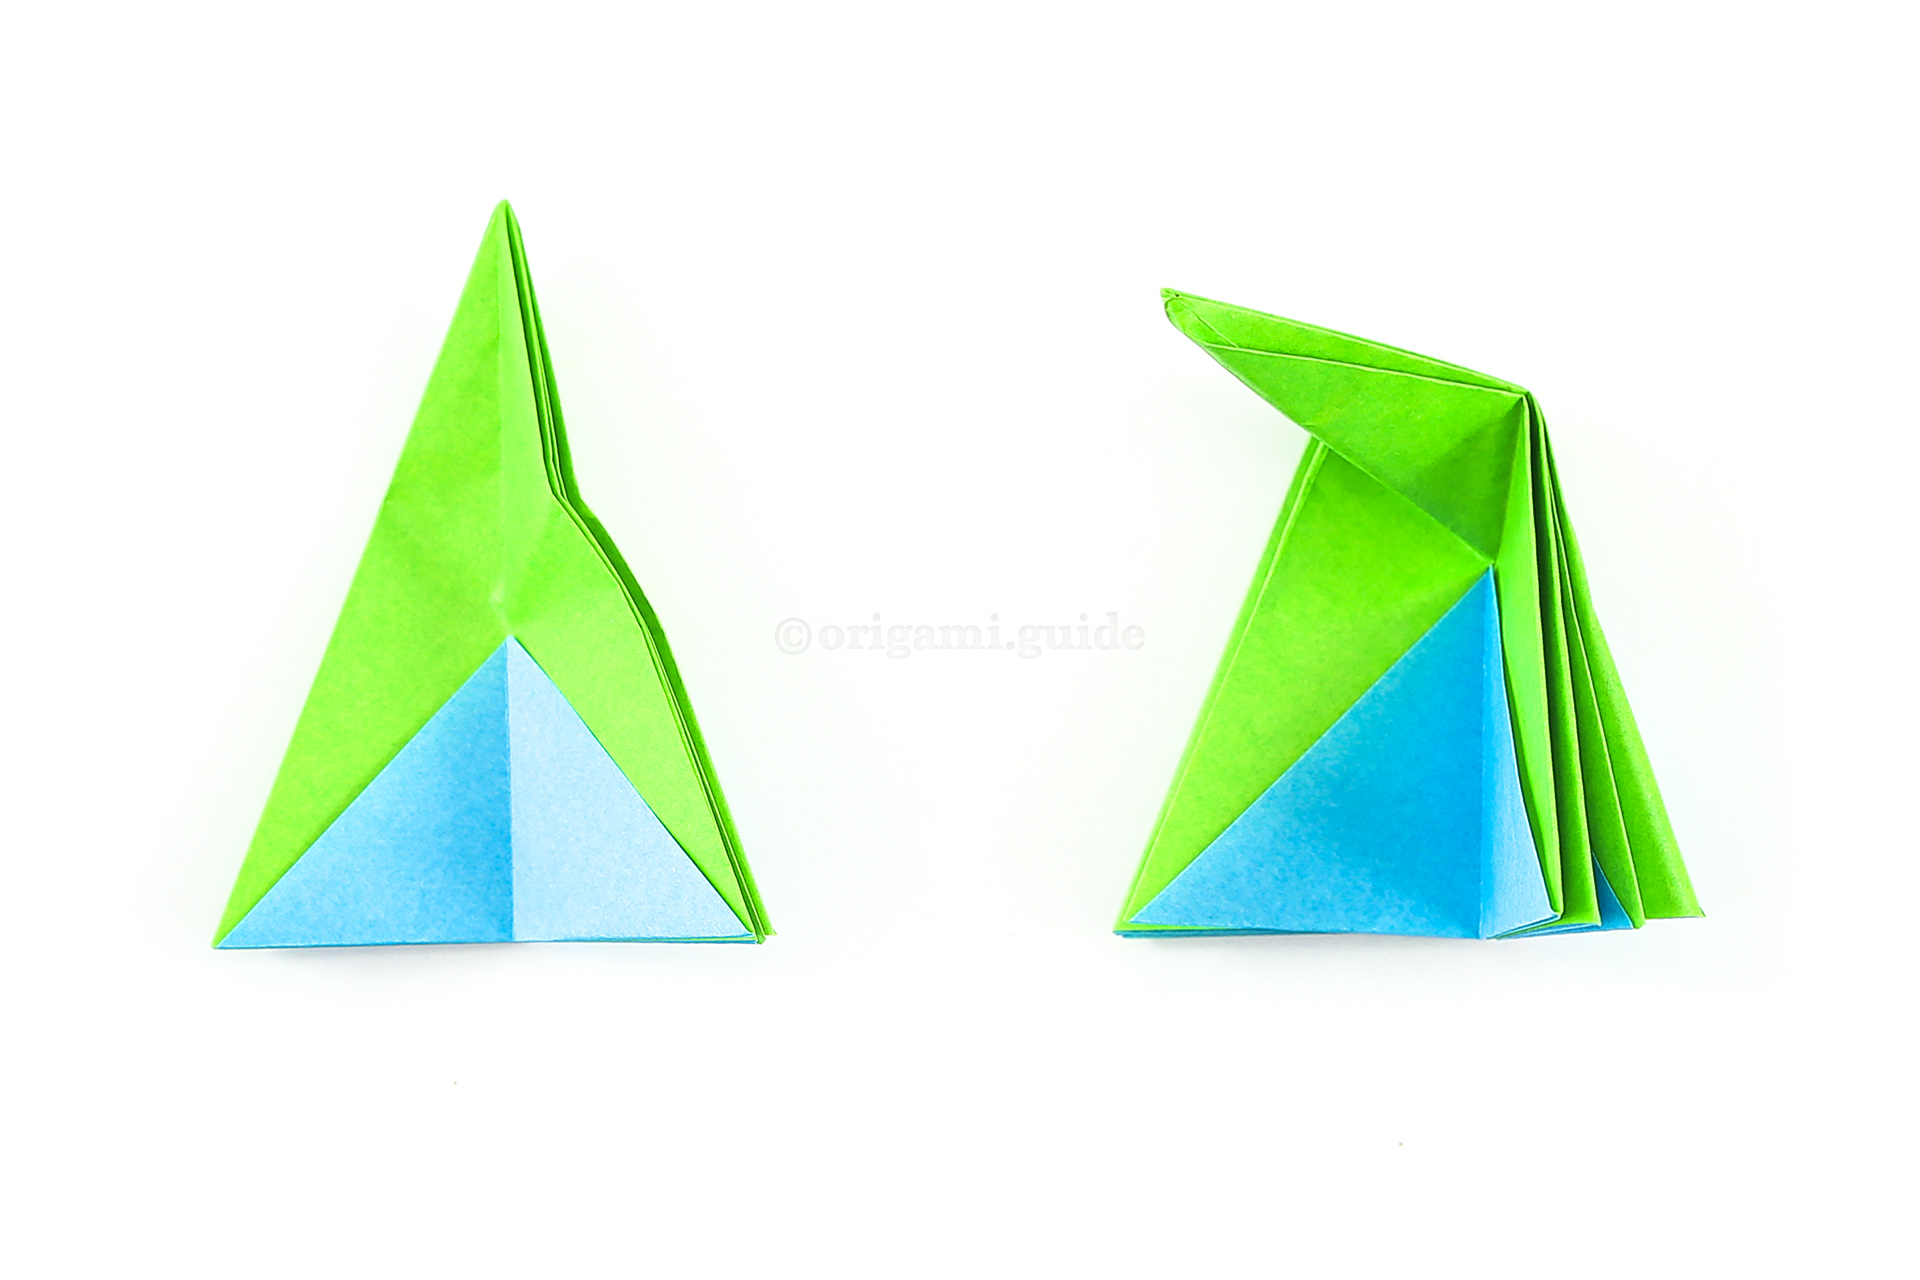 Let the previous two steps unfold. Next, reverse the crease on the top section of the triangle, and bring it down, using the previous folds as guides.